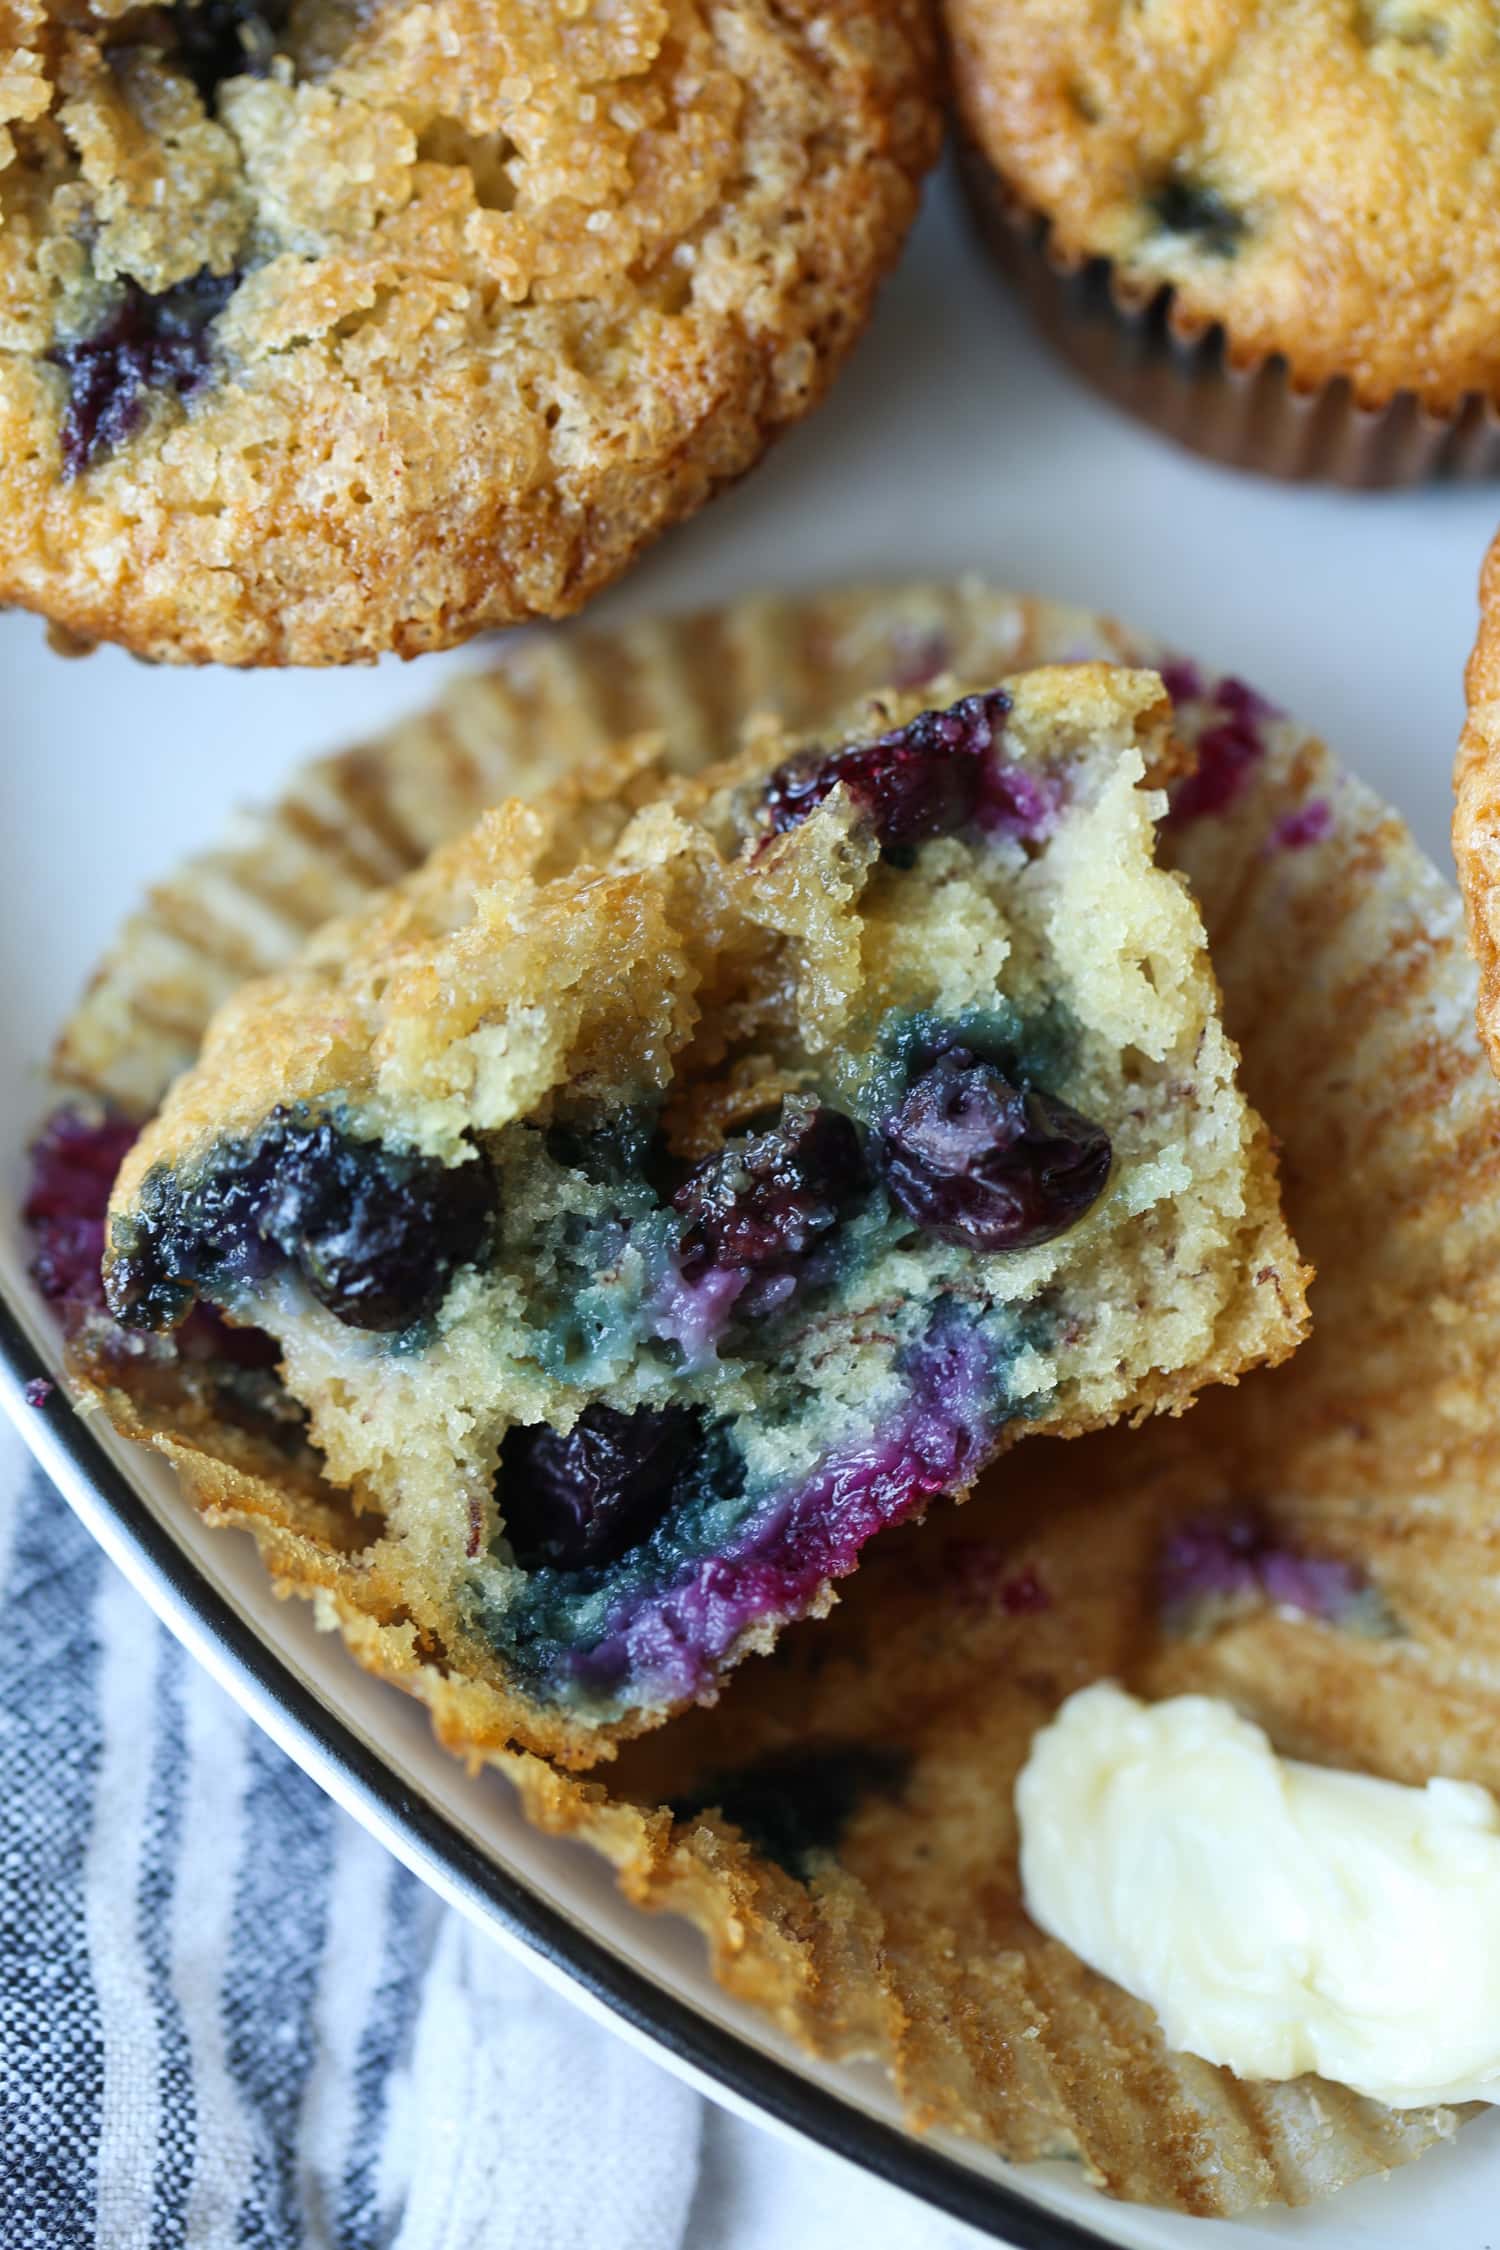 Half of a muffin with fresh blueberries.